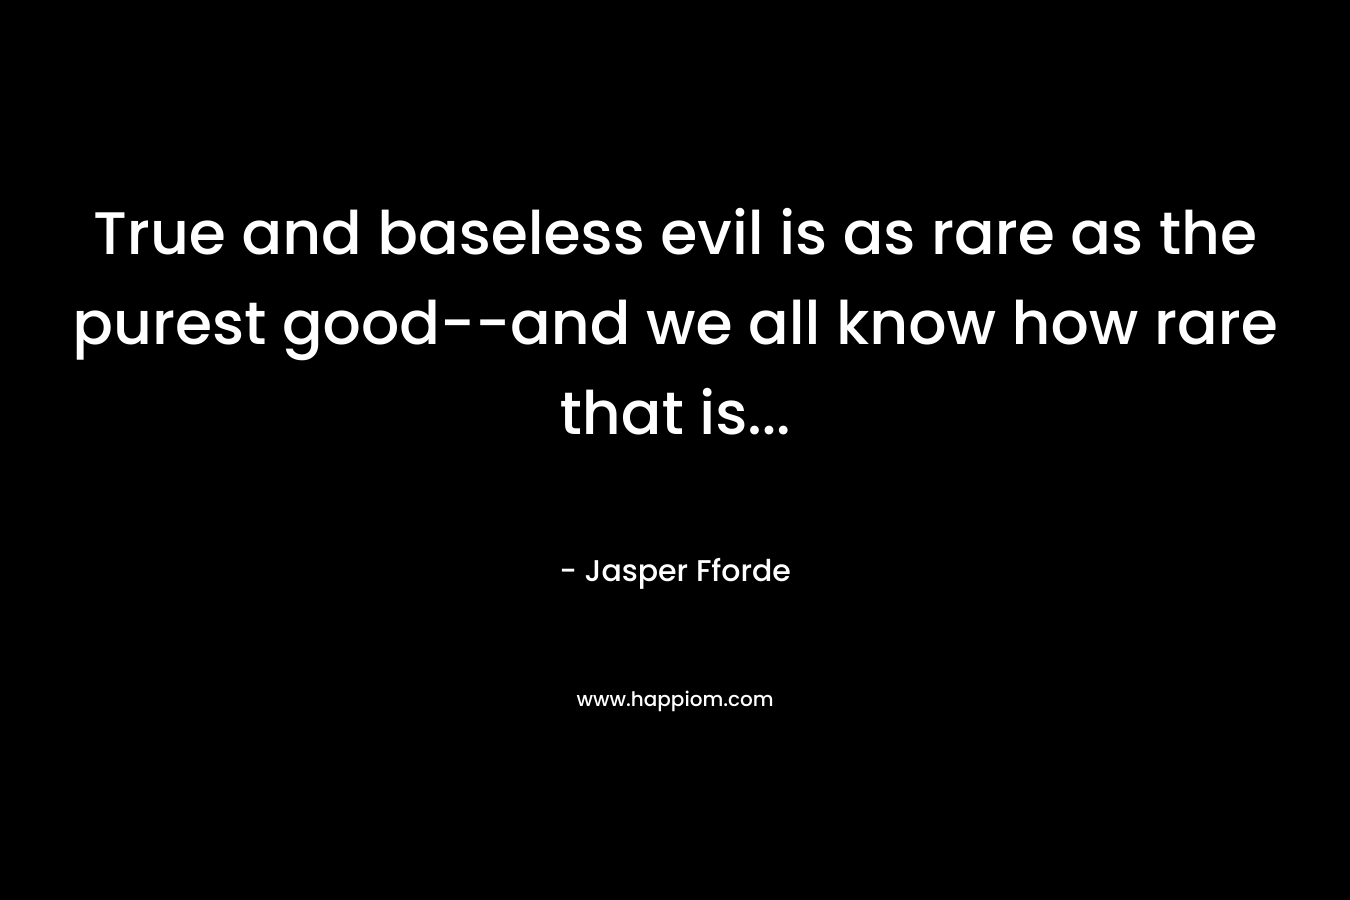 True and baseless evil is as rare as the purest good--and we all know how rare that is...